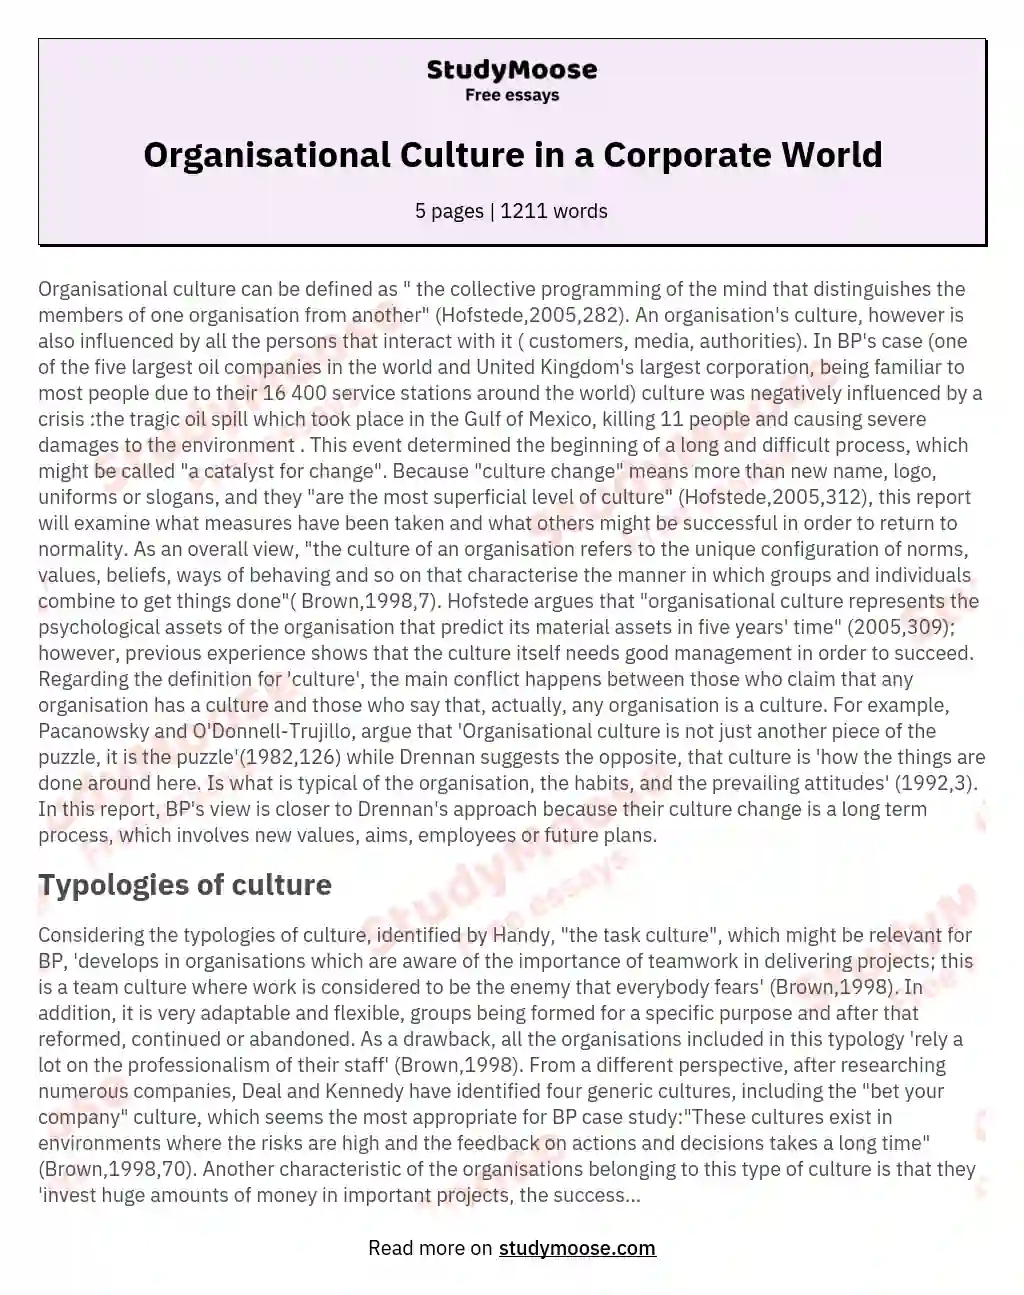 Organisational Culture in a Corporate World essay